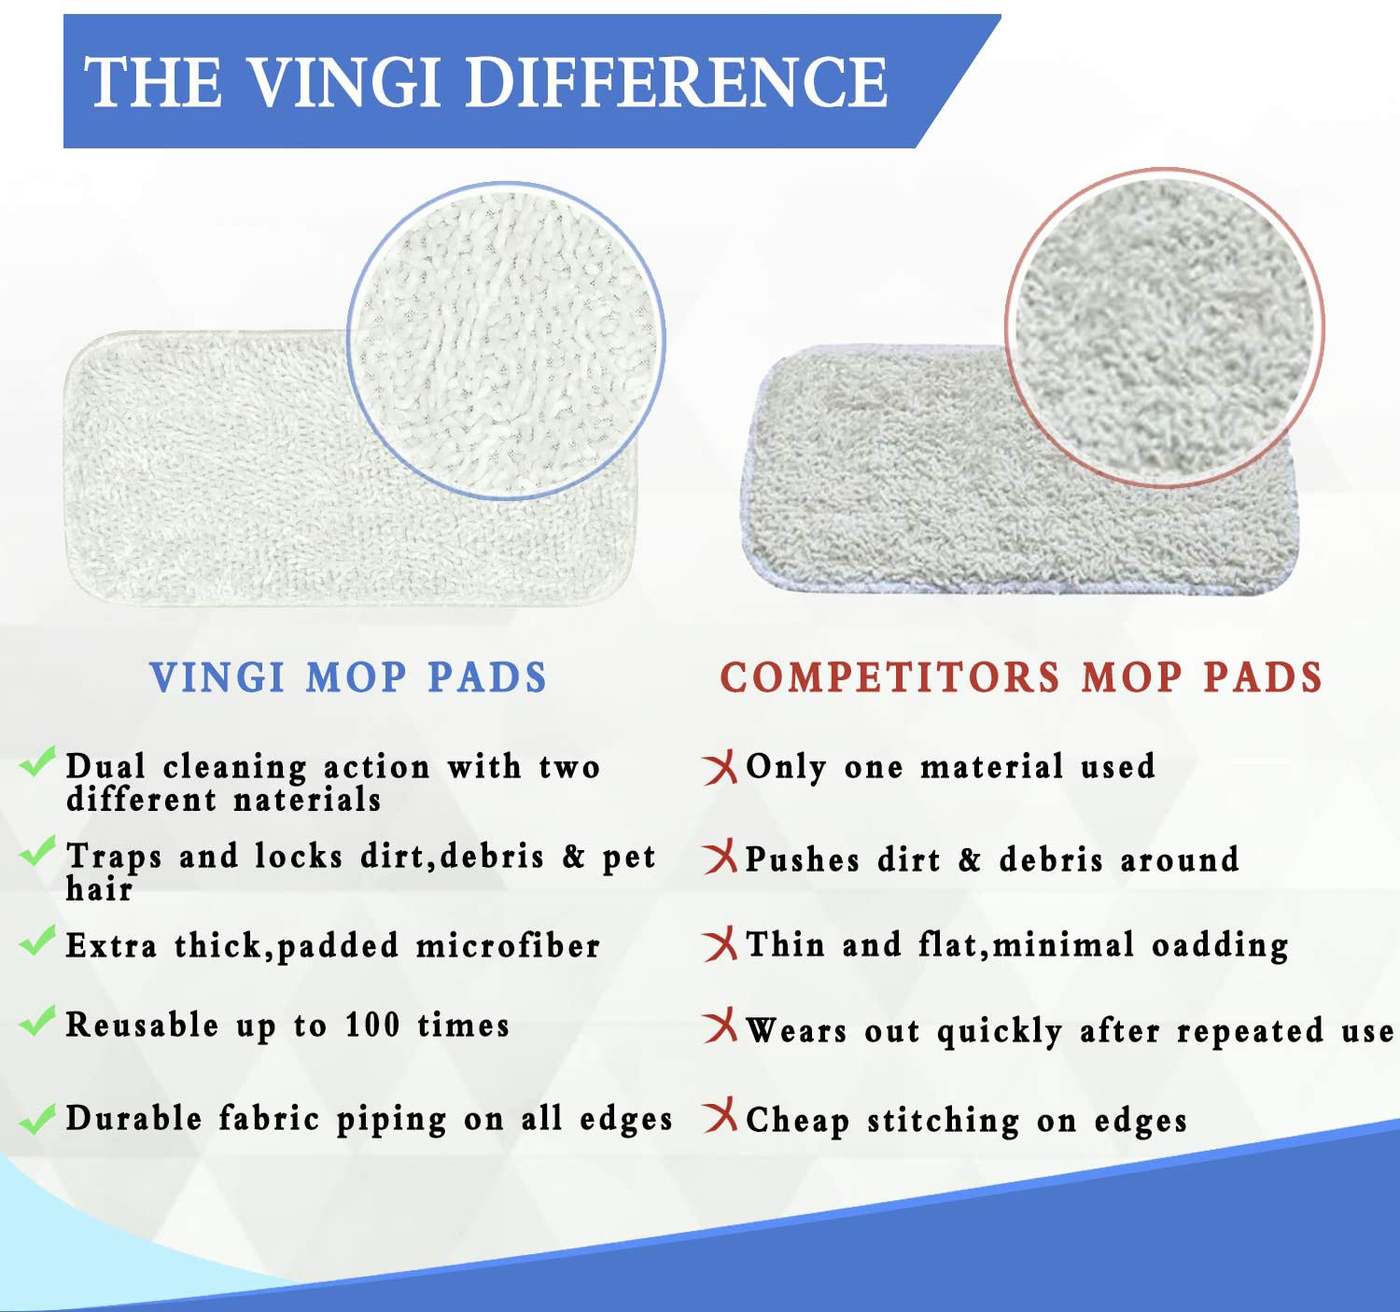 Vingi Sienna Luna Replacement Pads Microfiber Mop Pads Fit for Steamer Head SSM-3006 Series Hard Floor Mop Washable Durable Cloth Pads 2 Pack